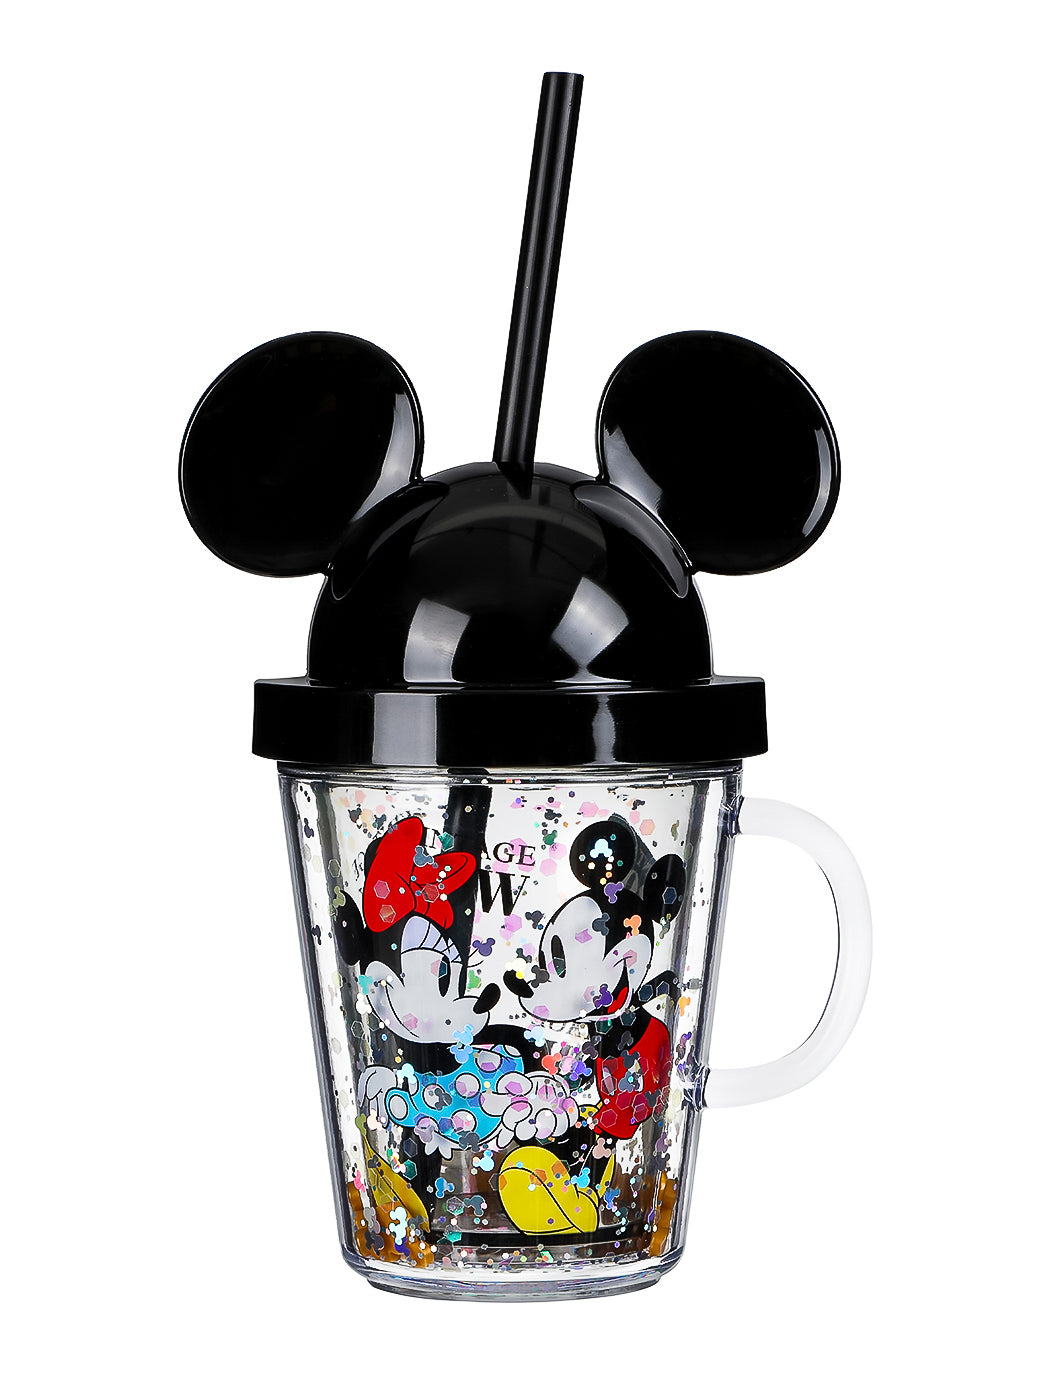 MINISO MICKEY MOUSE COLLECTION STRAW MUG WITH LID 280ML 2008484210104 PLASTIC WATER BOTTLE-11